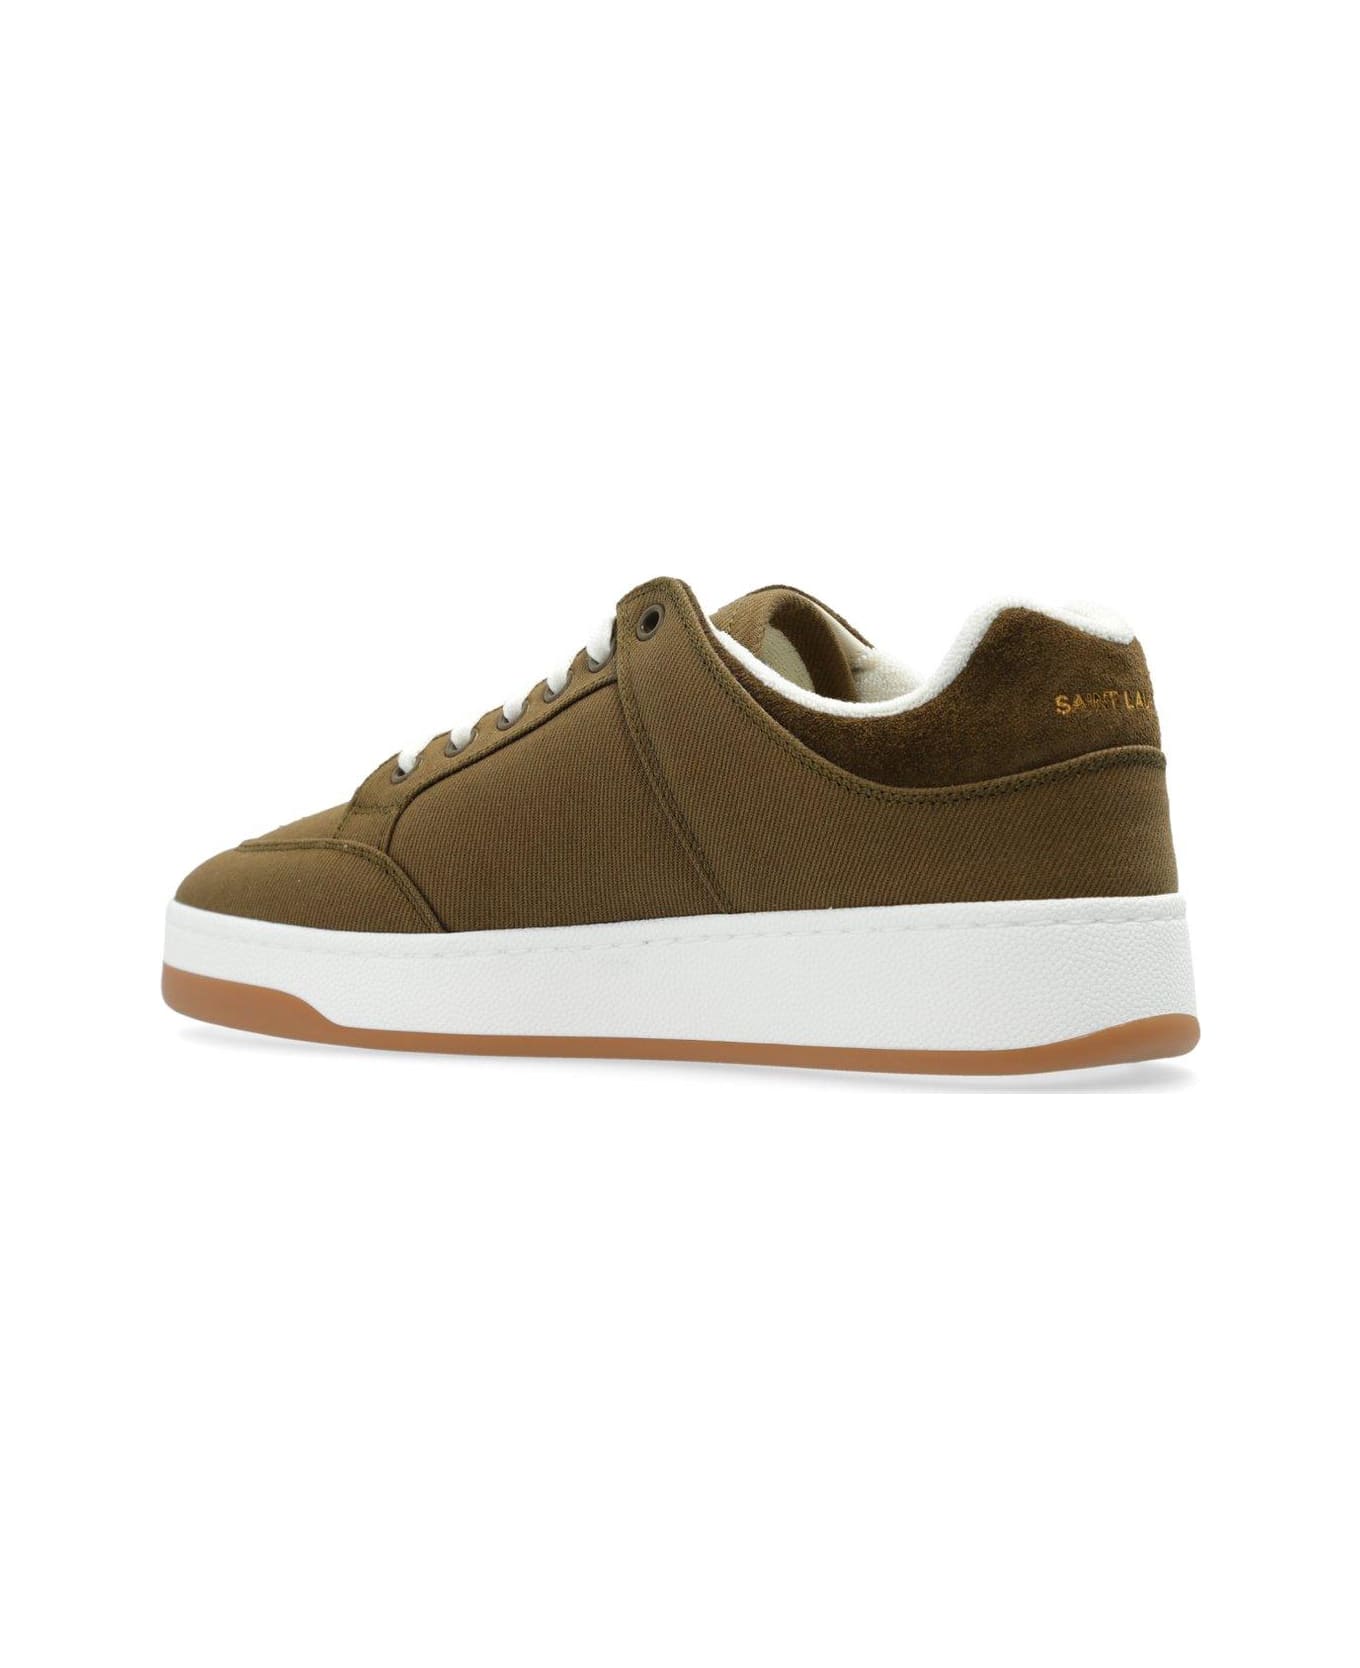 Saint Laurent Sl/61 Lace-up Sneakers - CACTUS/MILITARY GREE